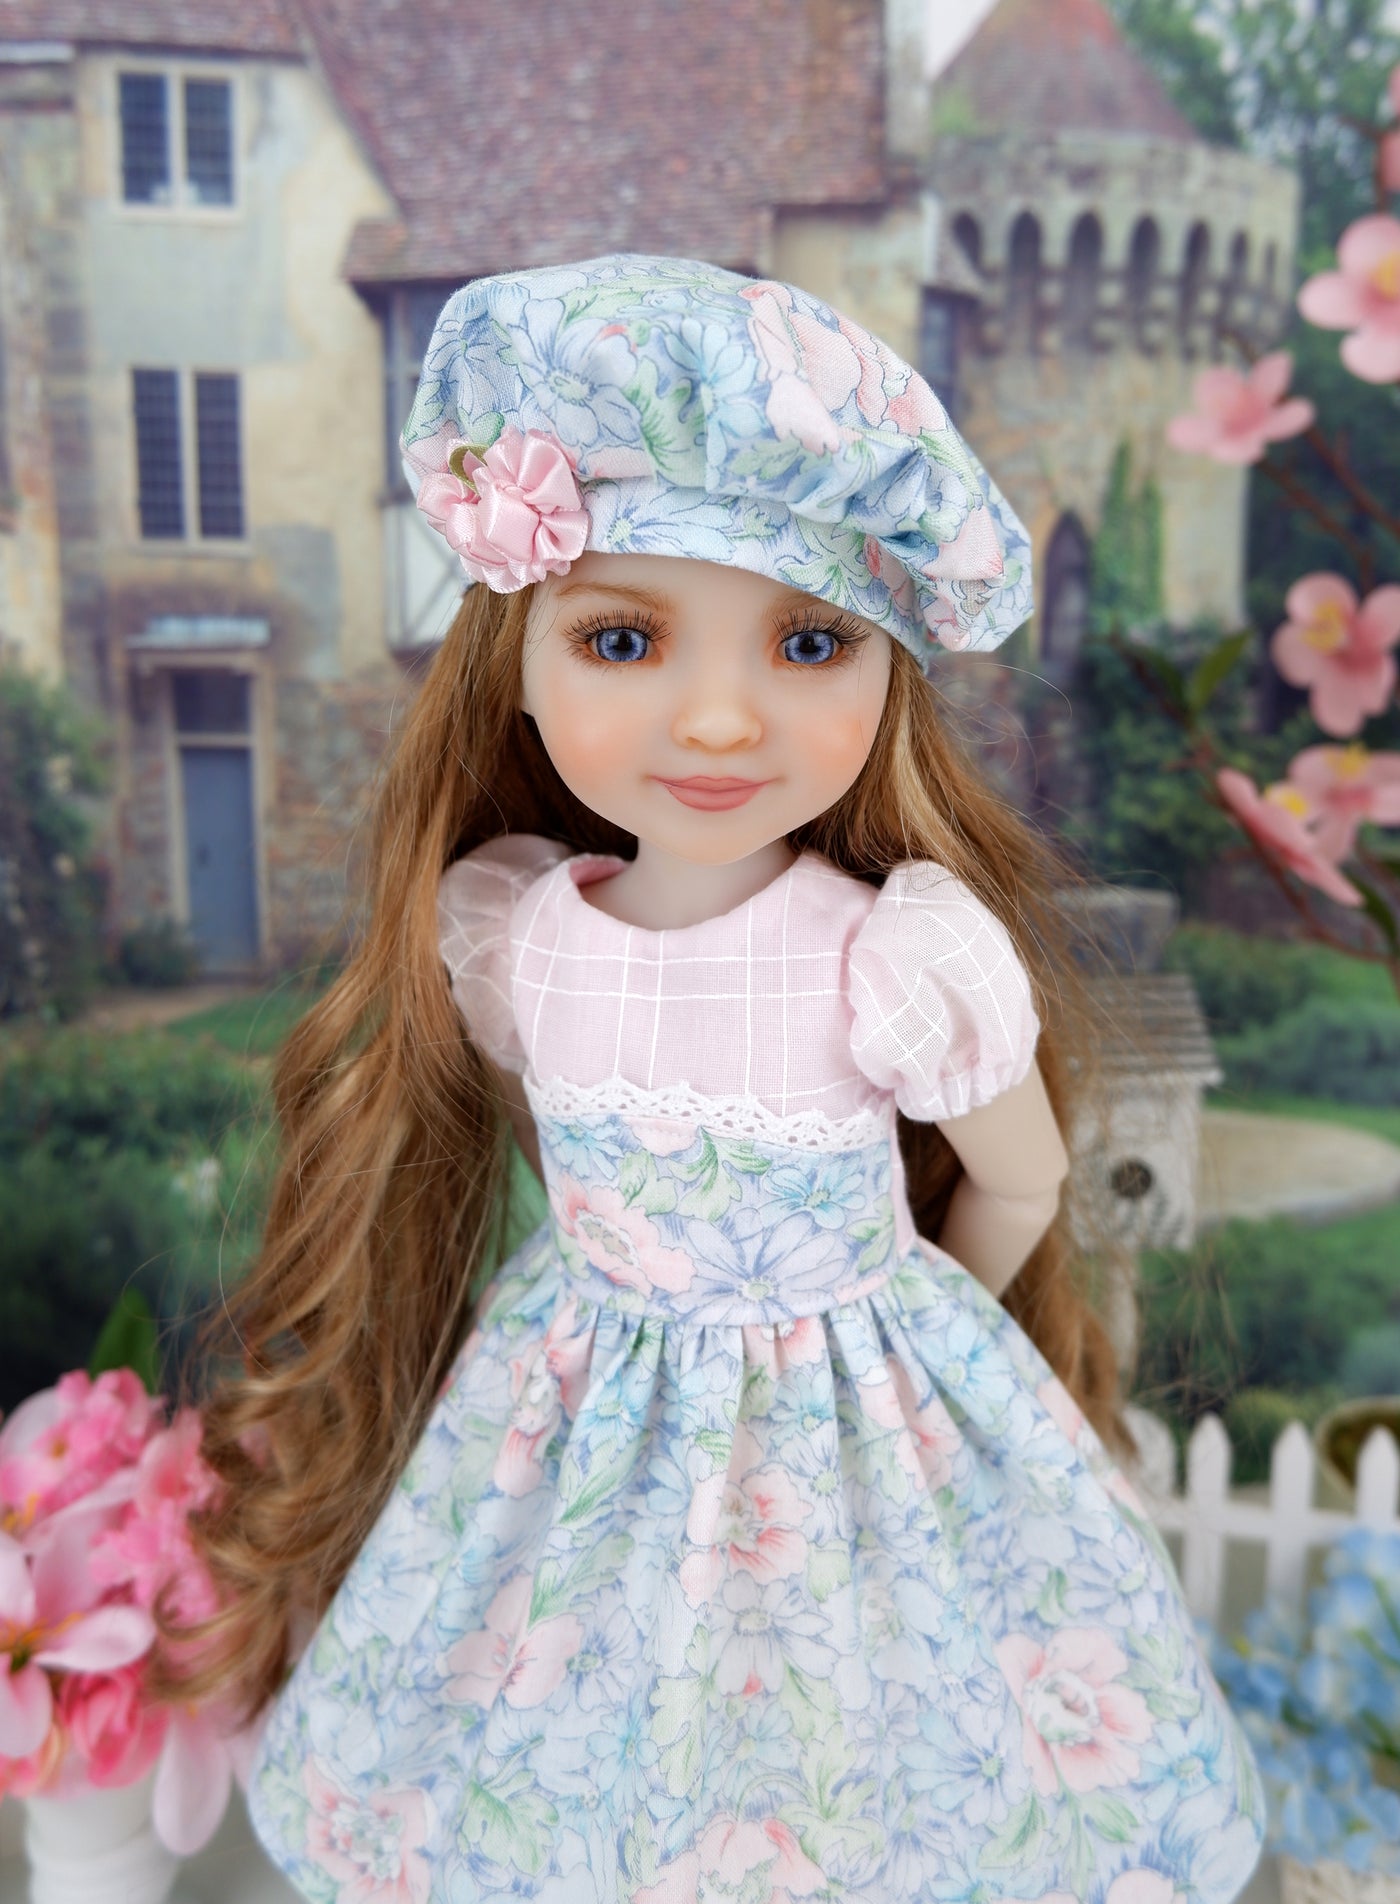 Watercolor Florals - dress and shoes for Ruby Red Fashion Friends doll